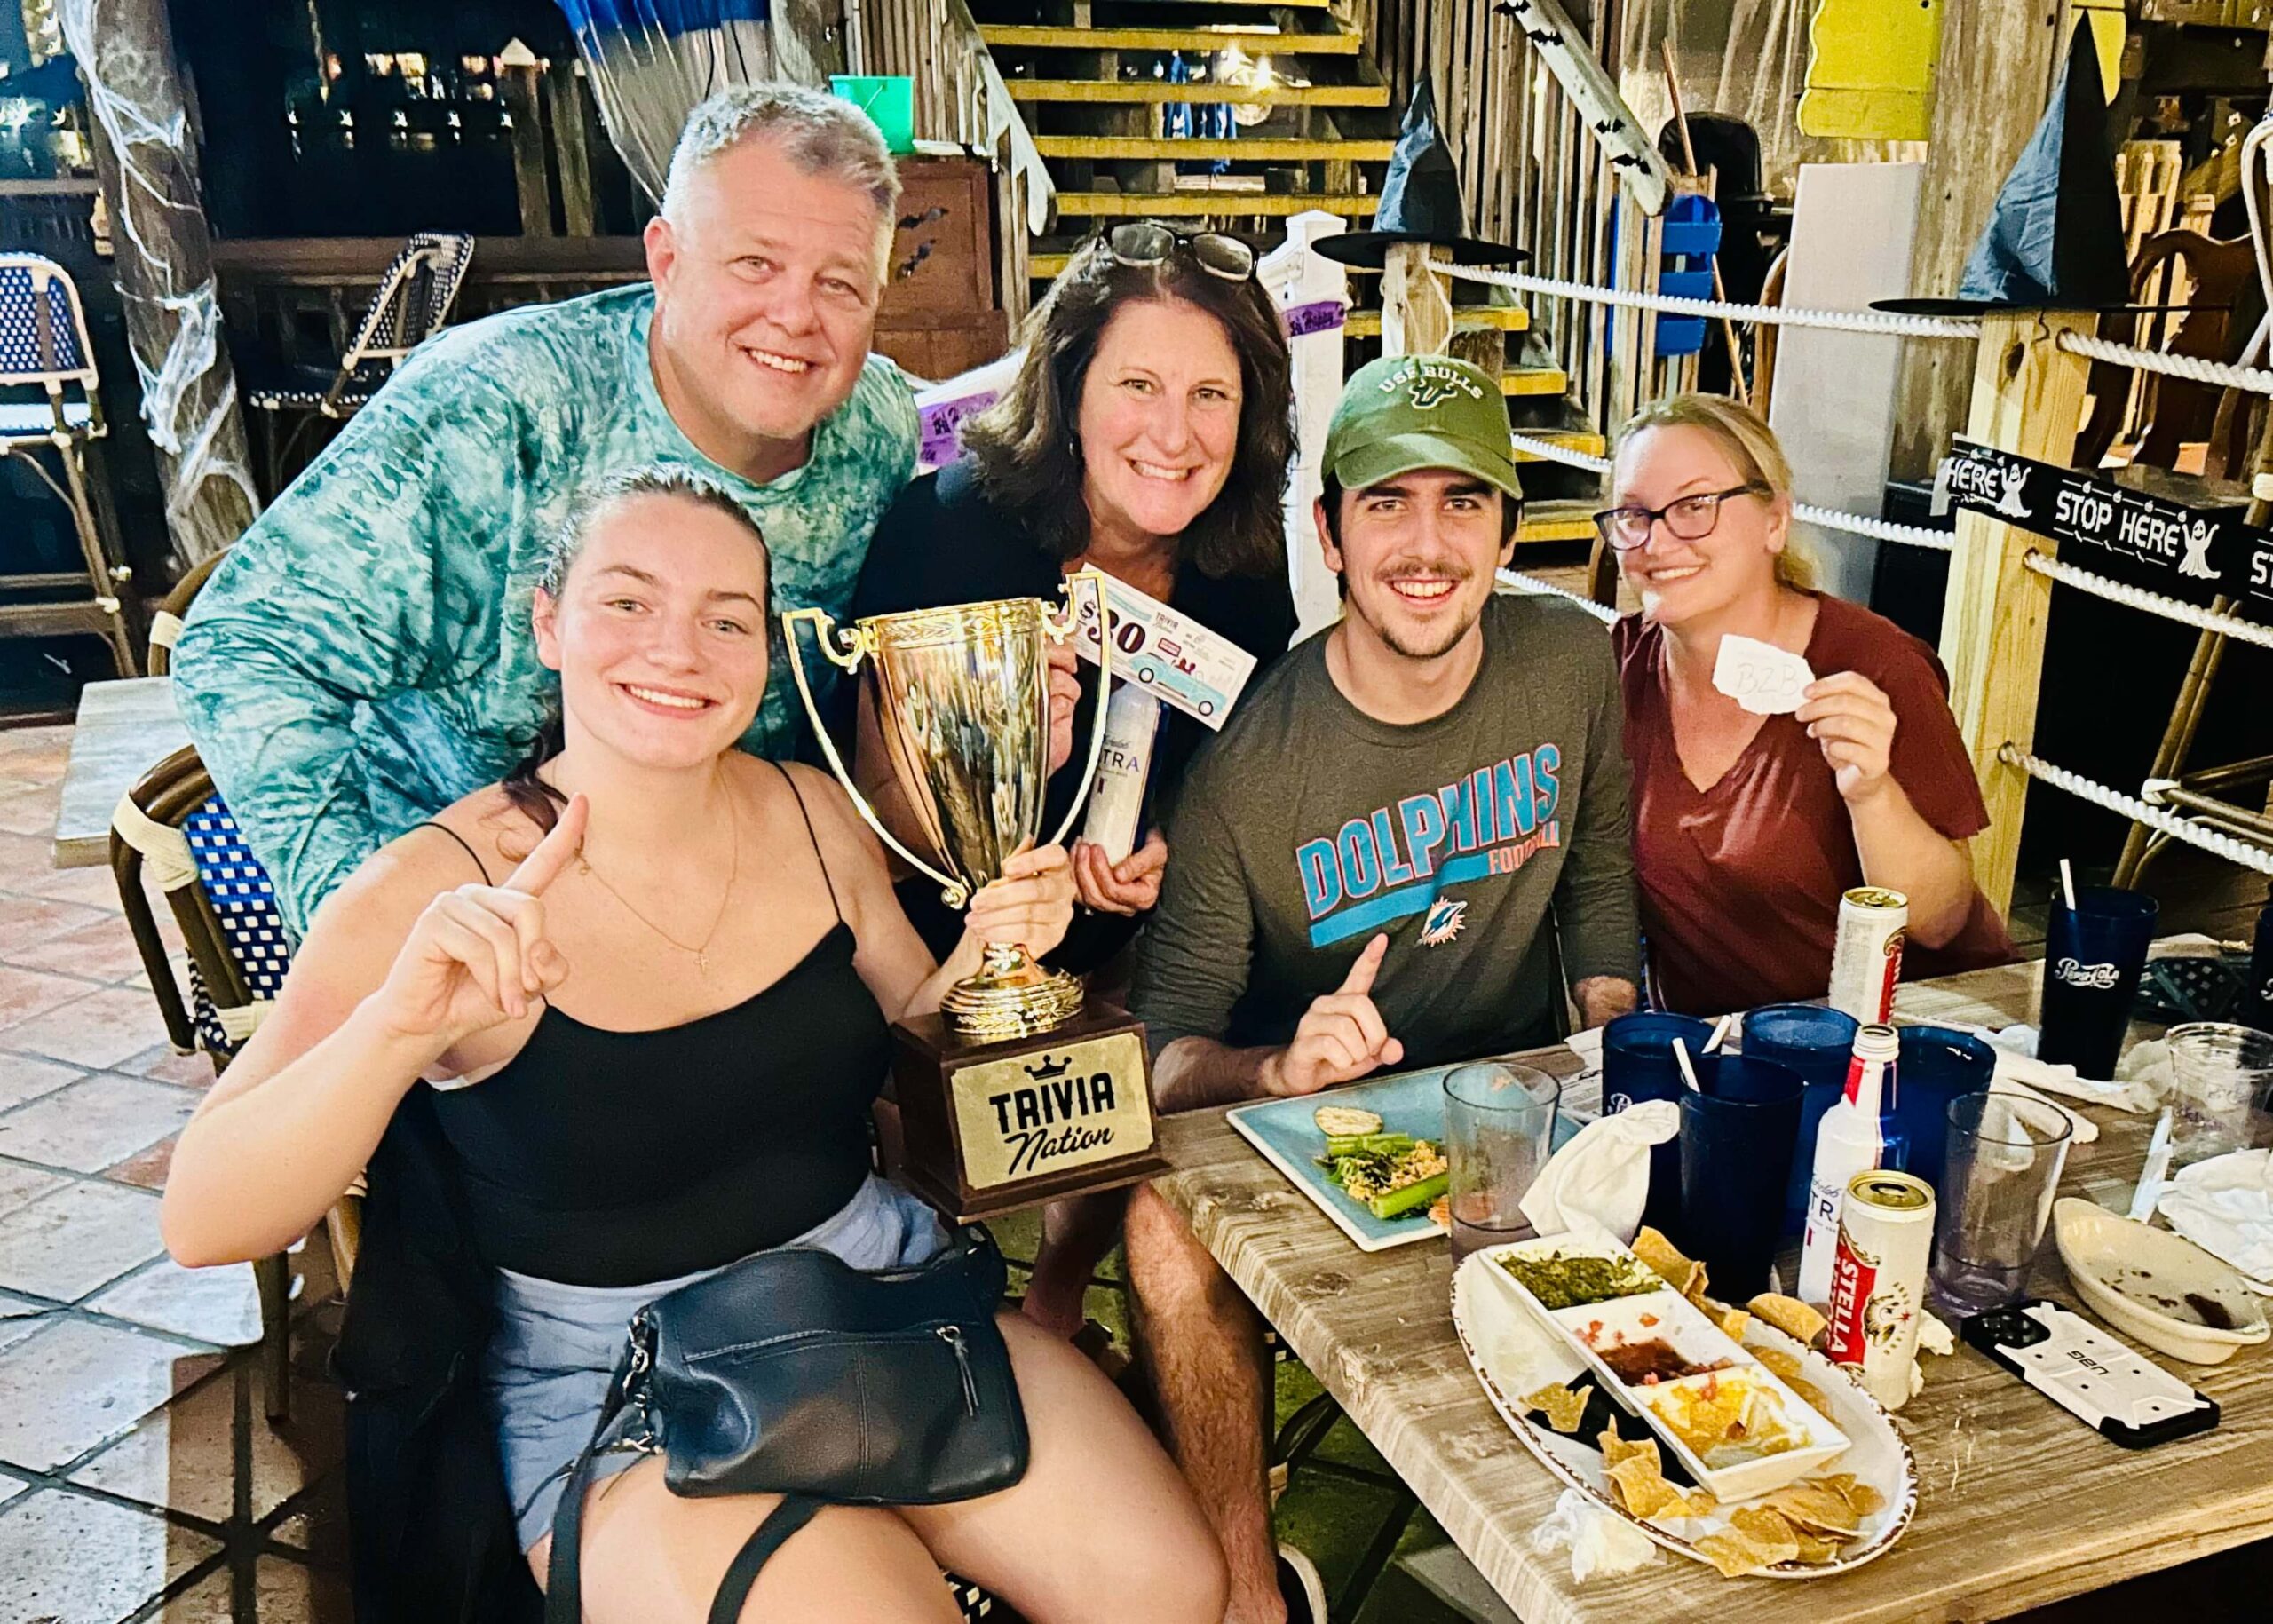 Caddy's John's Pass Madeira Beach FL 33708 trivia night: close-up of a family gathered together at a table smiling around a Trivia Nation trophy and plates of food and drinks